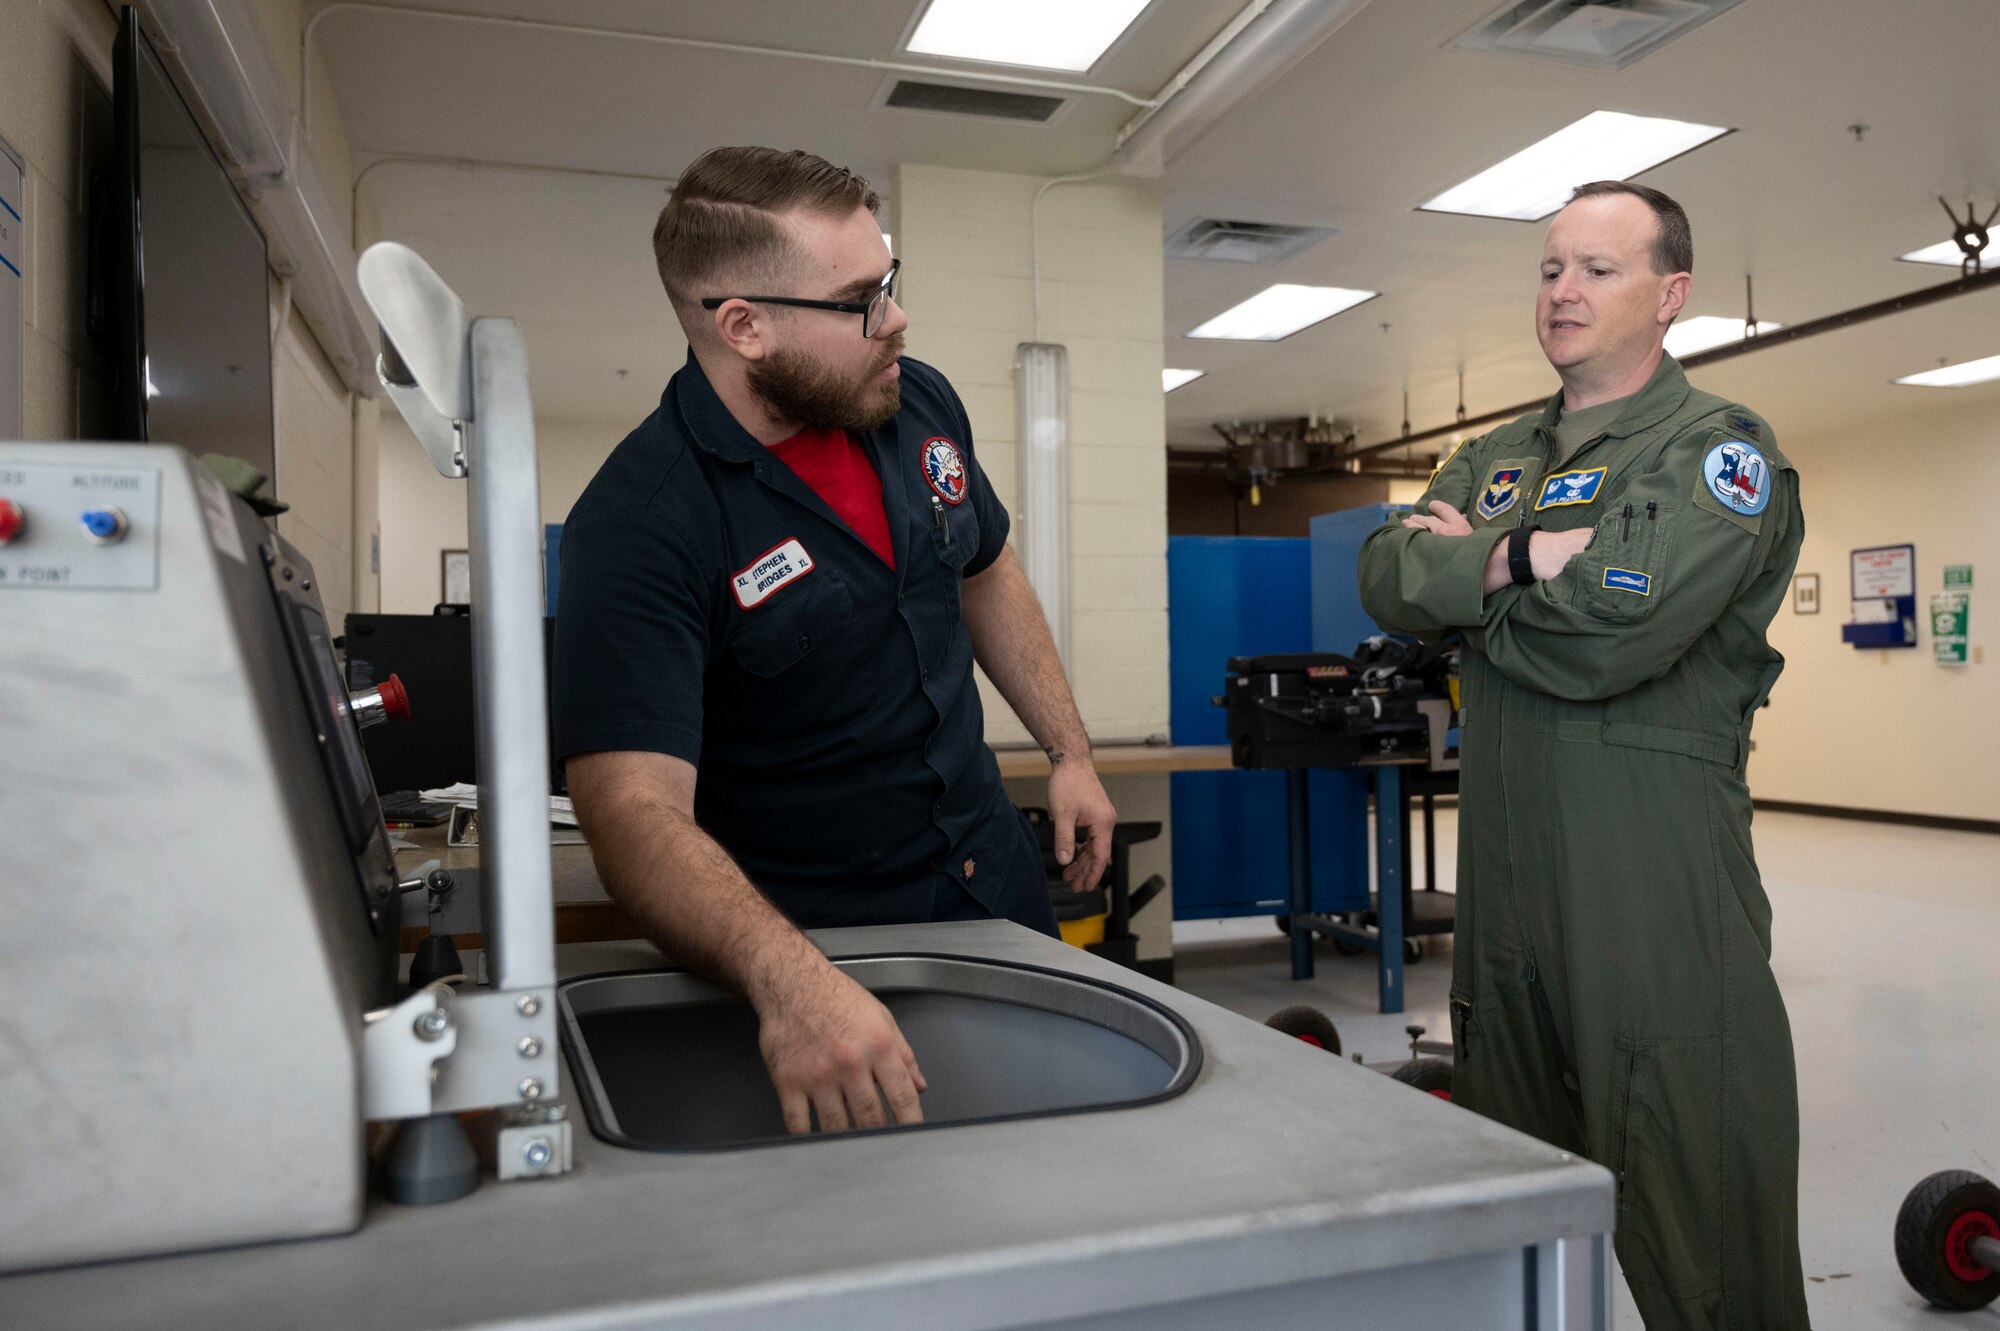 Stephen Bridges, 47th Maintenance Directorate aircraft ordnance technician, shows Col. Craig Prather, 47th Flying Training Wing commander, the operations of a machine he uses to make sure that each ejection seat is successful in its performance at the Egress Shop on Laughlin Air Force Base, Texas, April 8, 2022. Bridges and his coworkers take apart, inspect, test, replace or repair the ejection seats that are in each aircraft at Laughlin daily to keep our pilots safe. (U.S. Air Force photo by Airman First Class Kailee Reynolds)